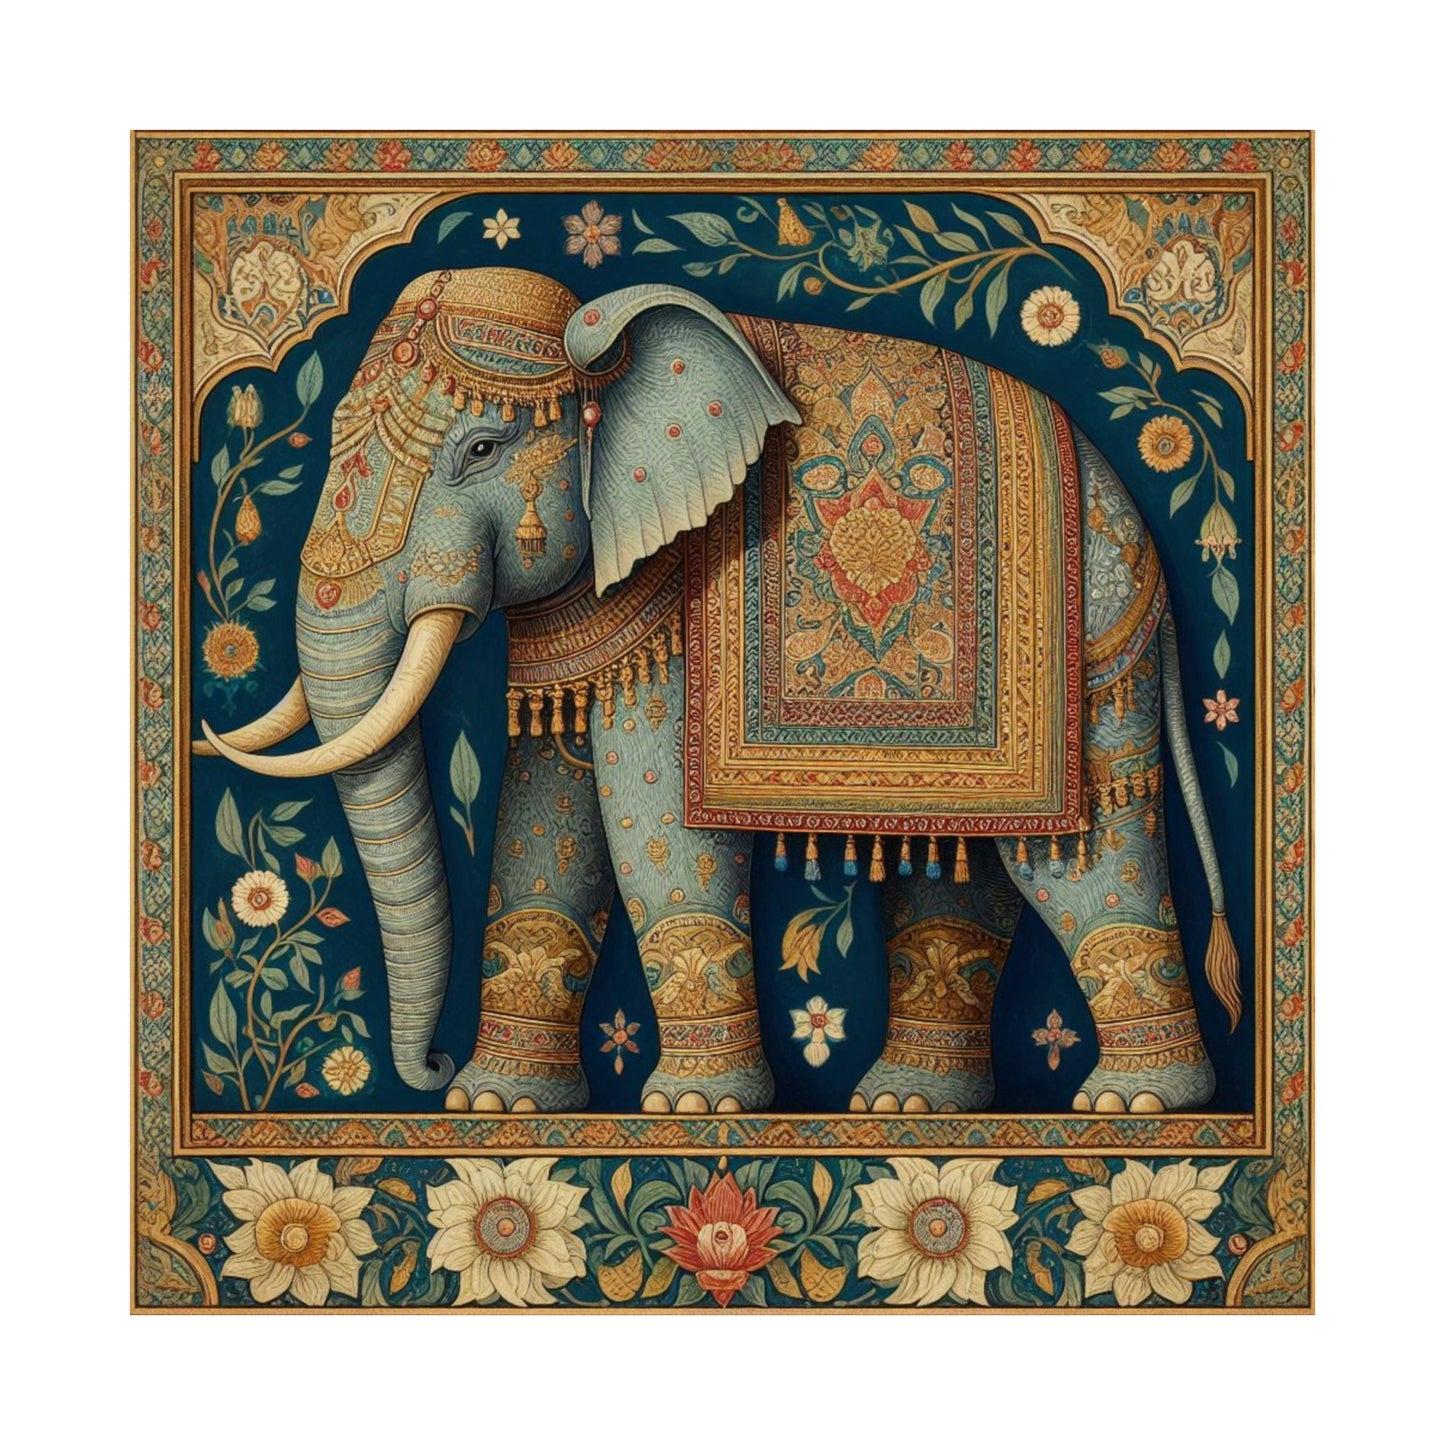 Floral Gold Elephant Vintage Mughal Miniature Indian Folk Painting Aesthetic Wall Art Poster Print  - Museum Quality Matte Paper 